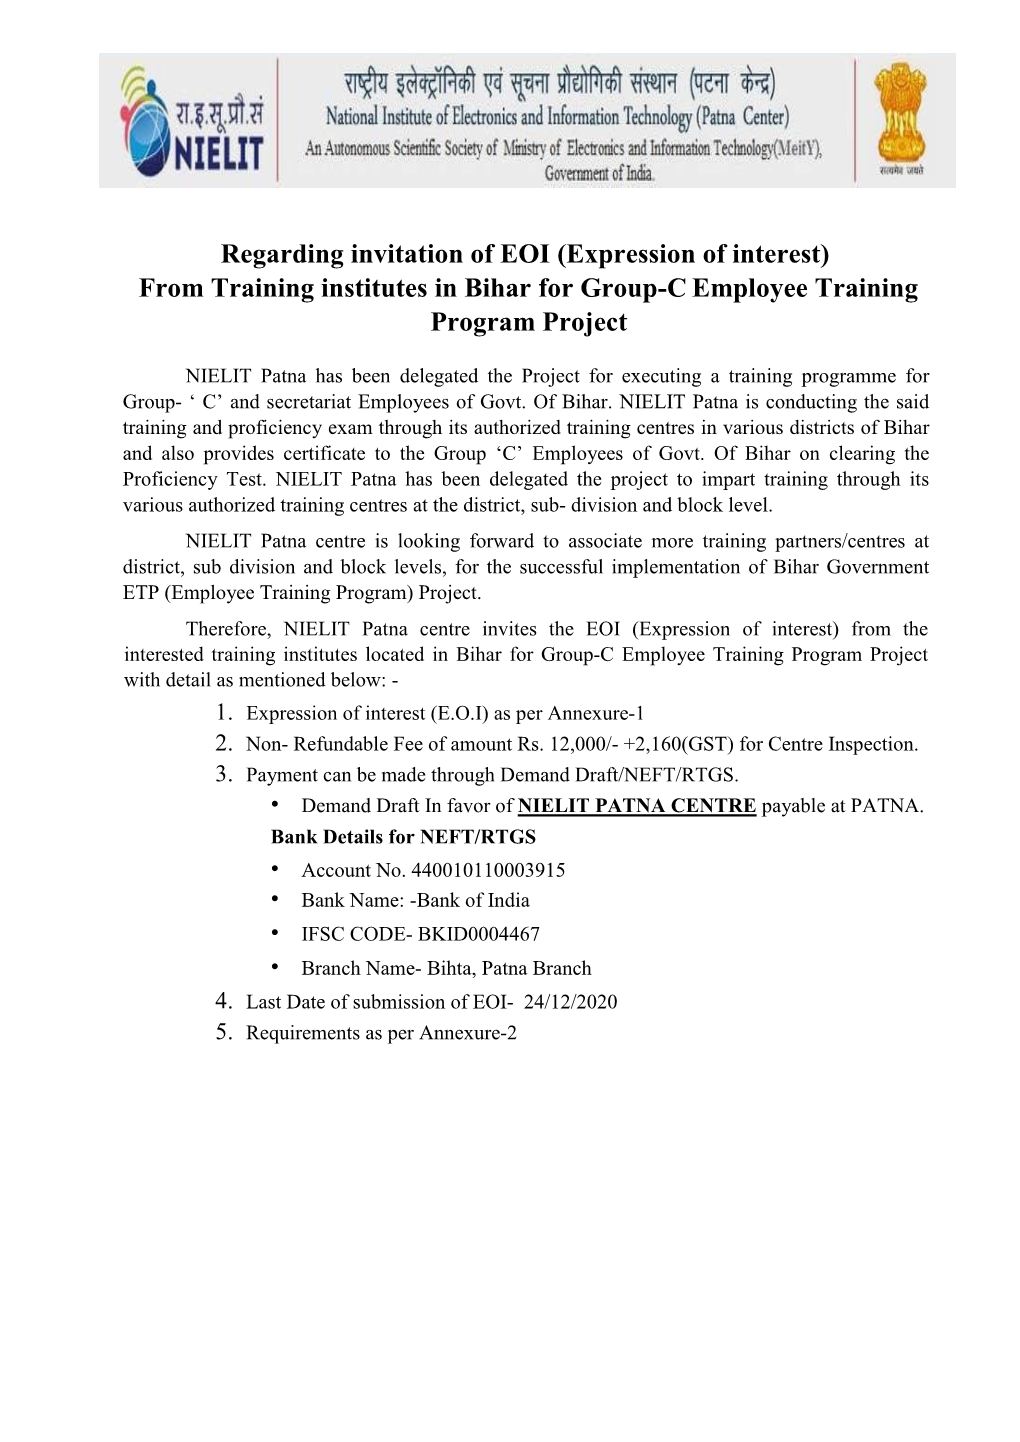 Invitation of EOI from Training Institutes in Bihar for Group 'C' Employee